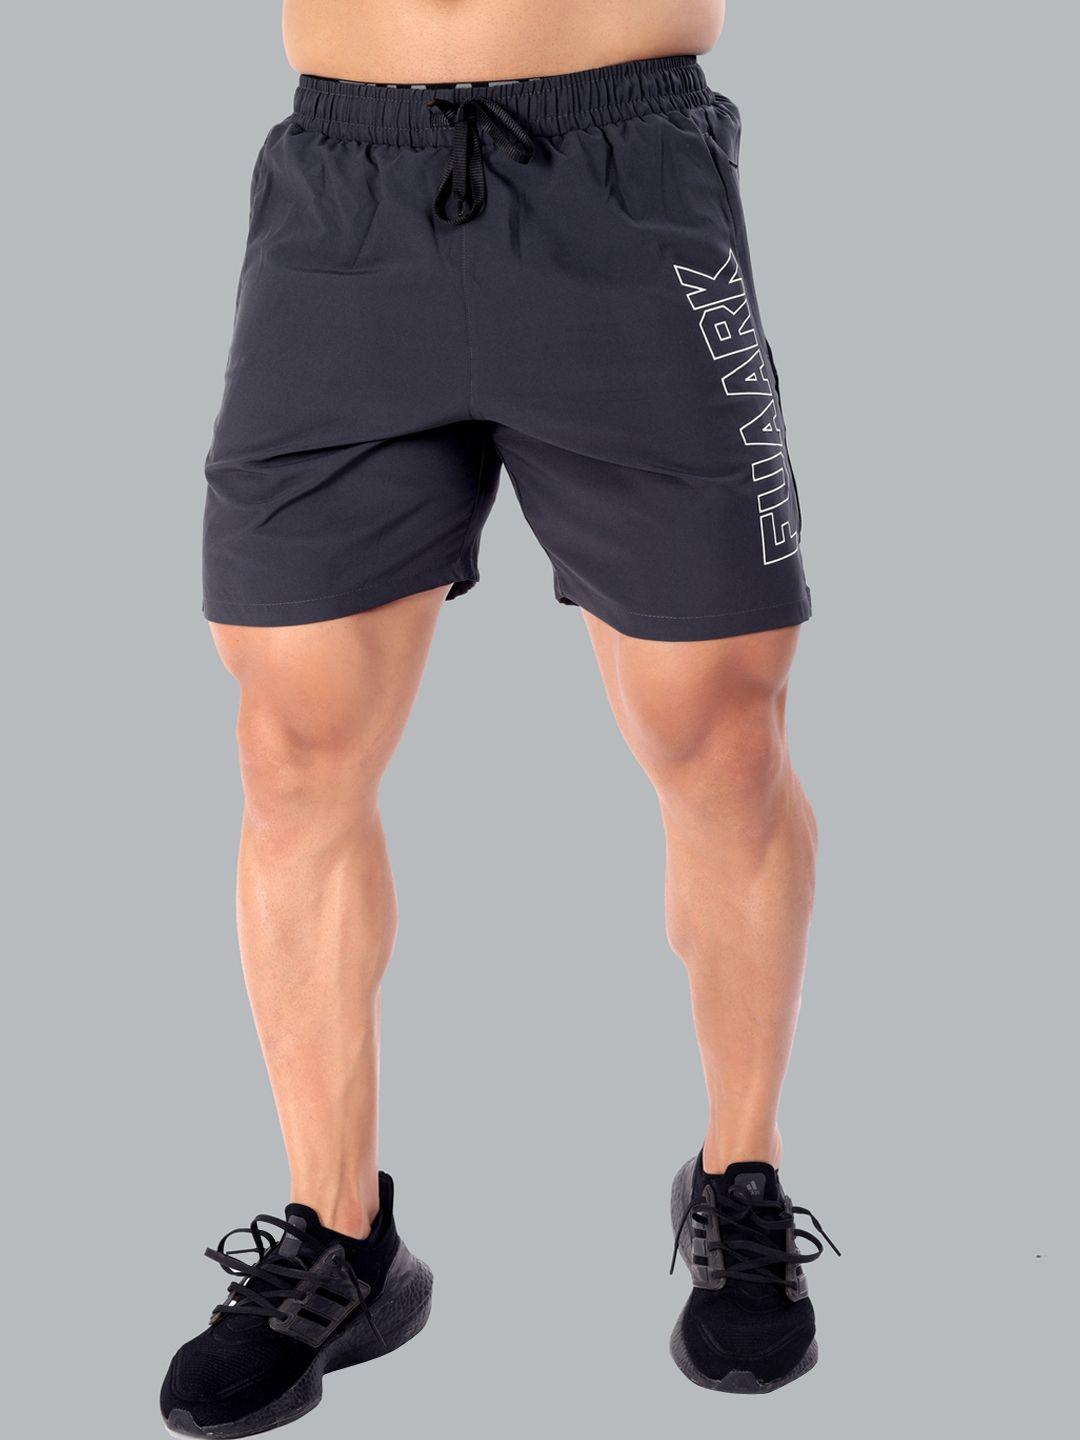 fuaark men mid-rise regular fit rapid dry training or gym sports shorts